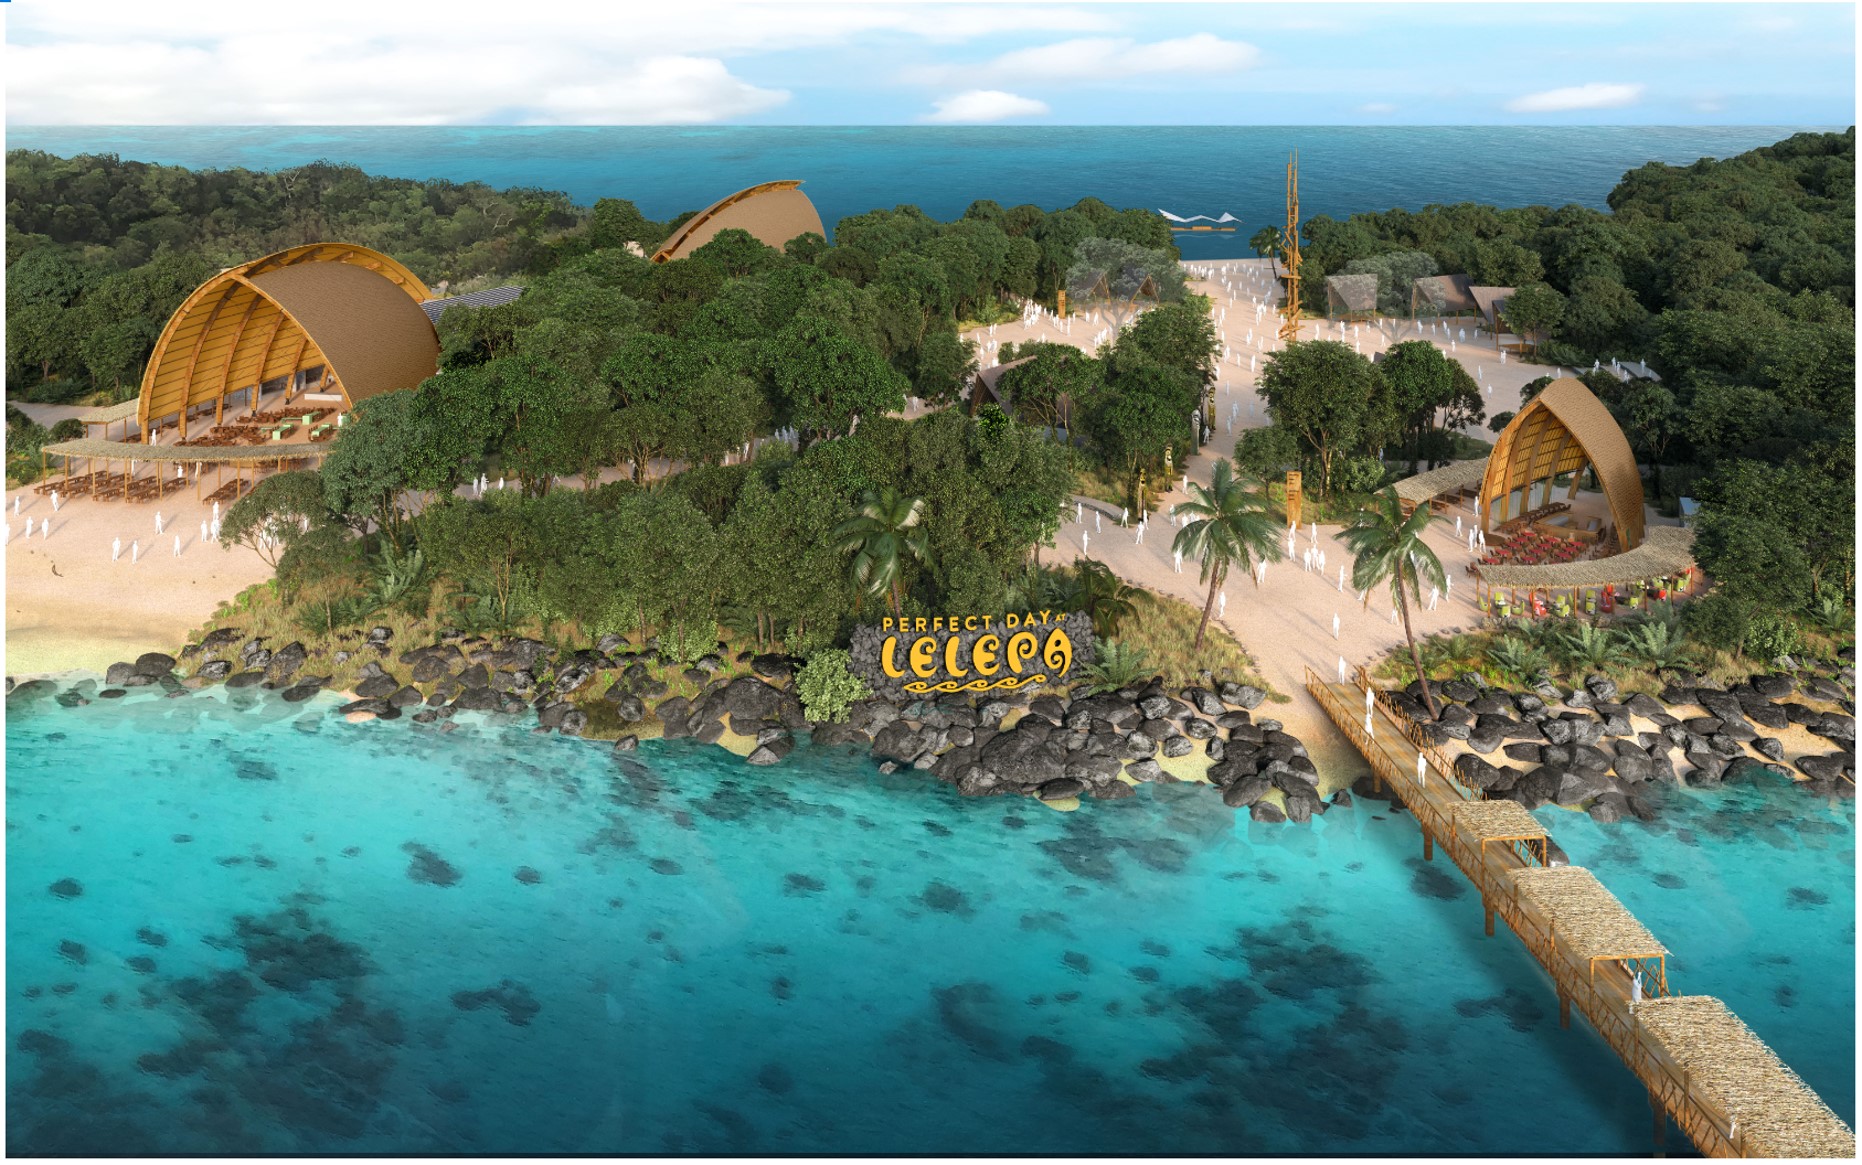 Royal Caribbean's first South Pacific private destination is back on track